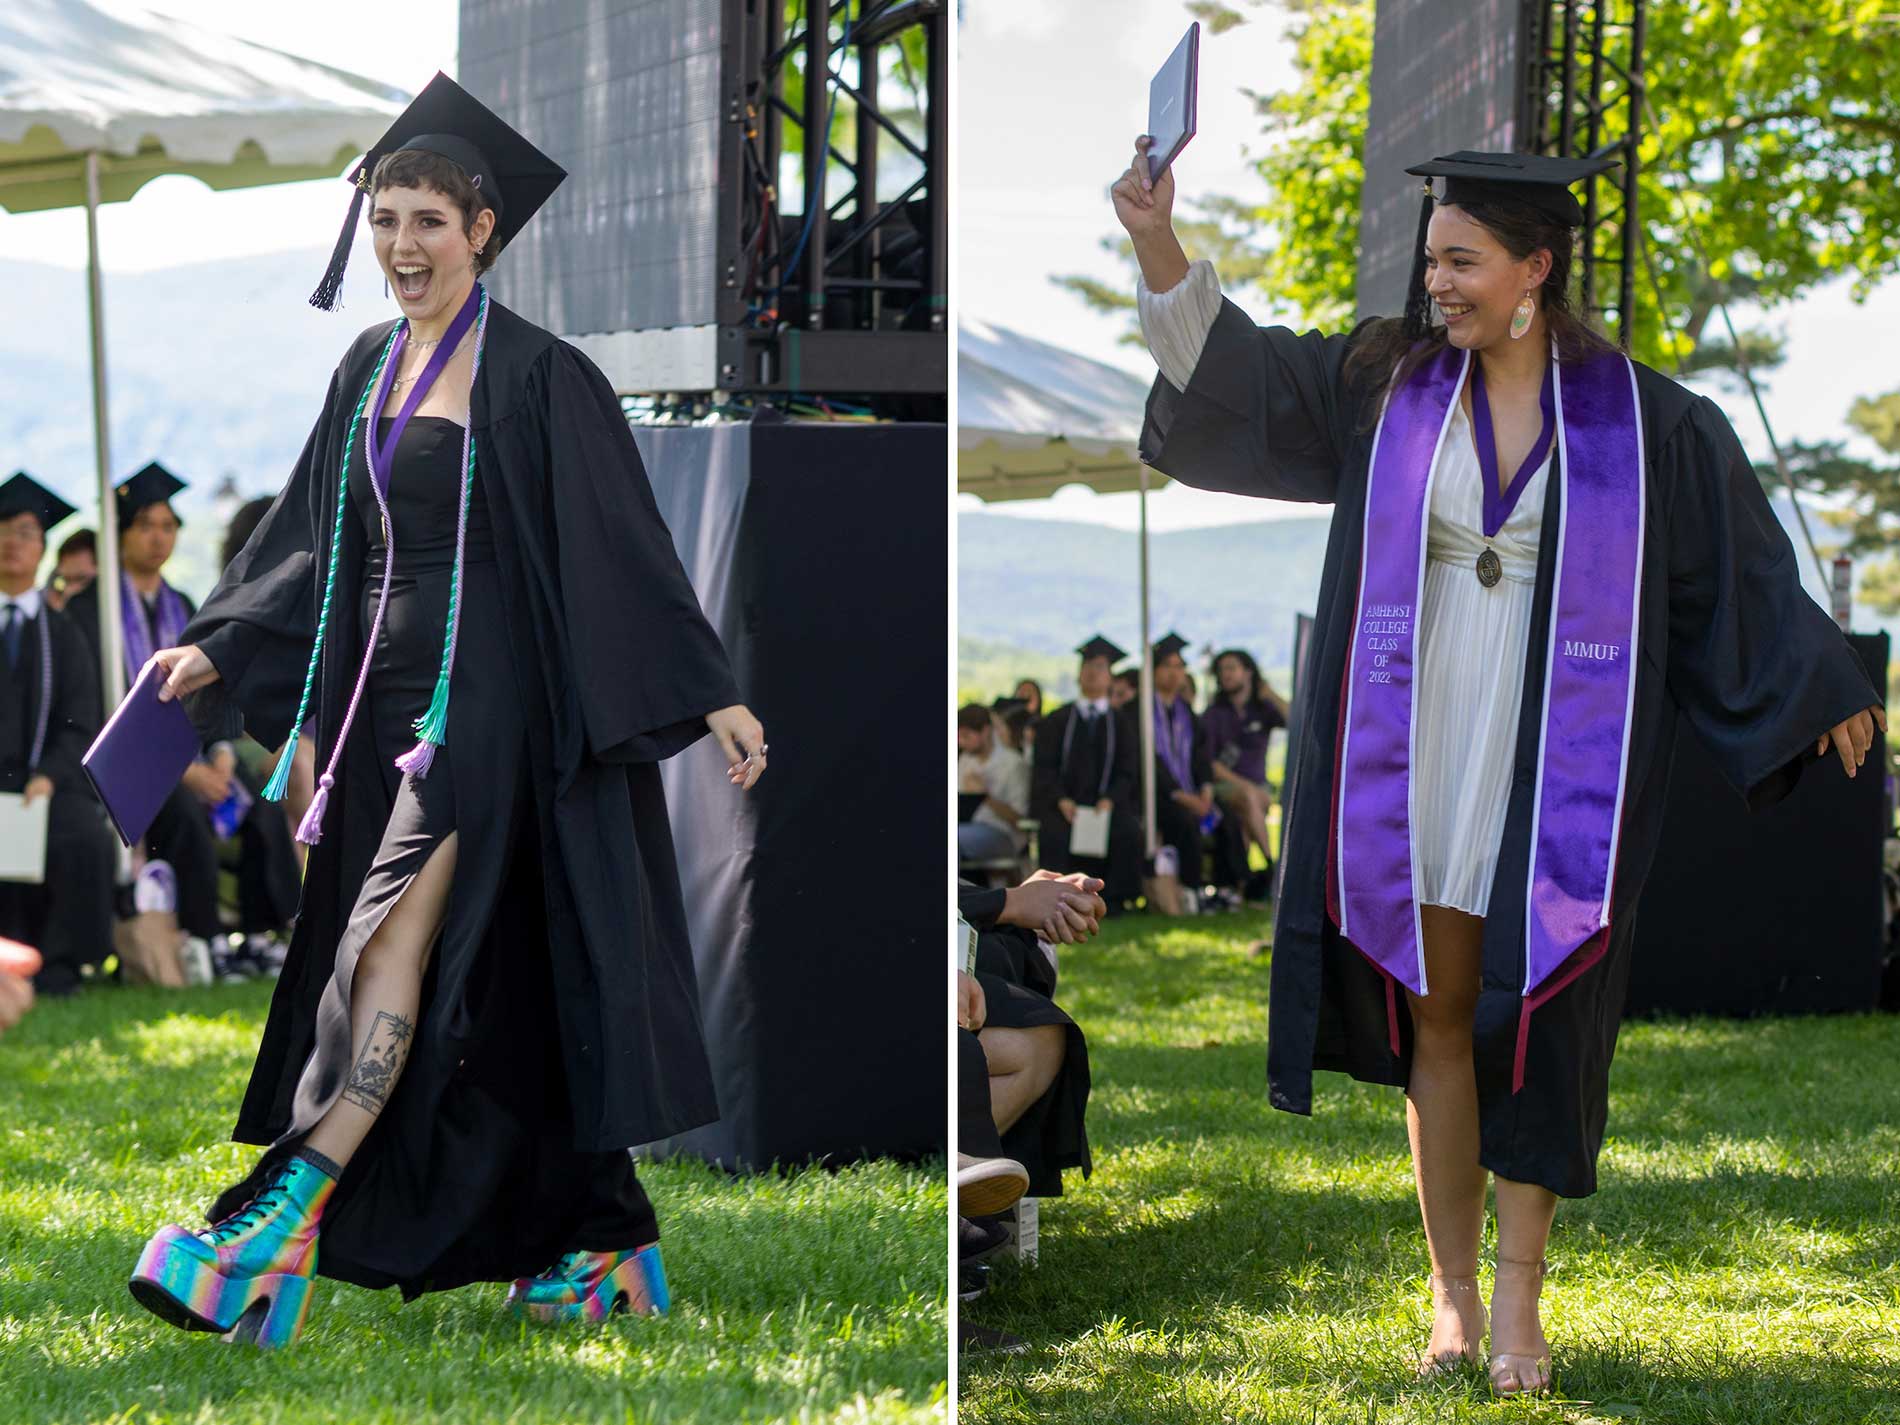 Two female graduates celebrate after receiving prizes.